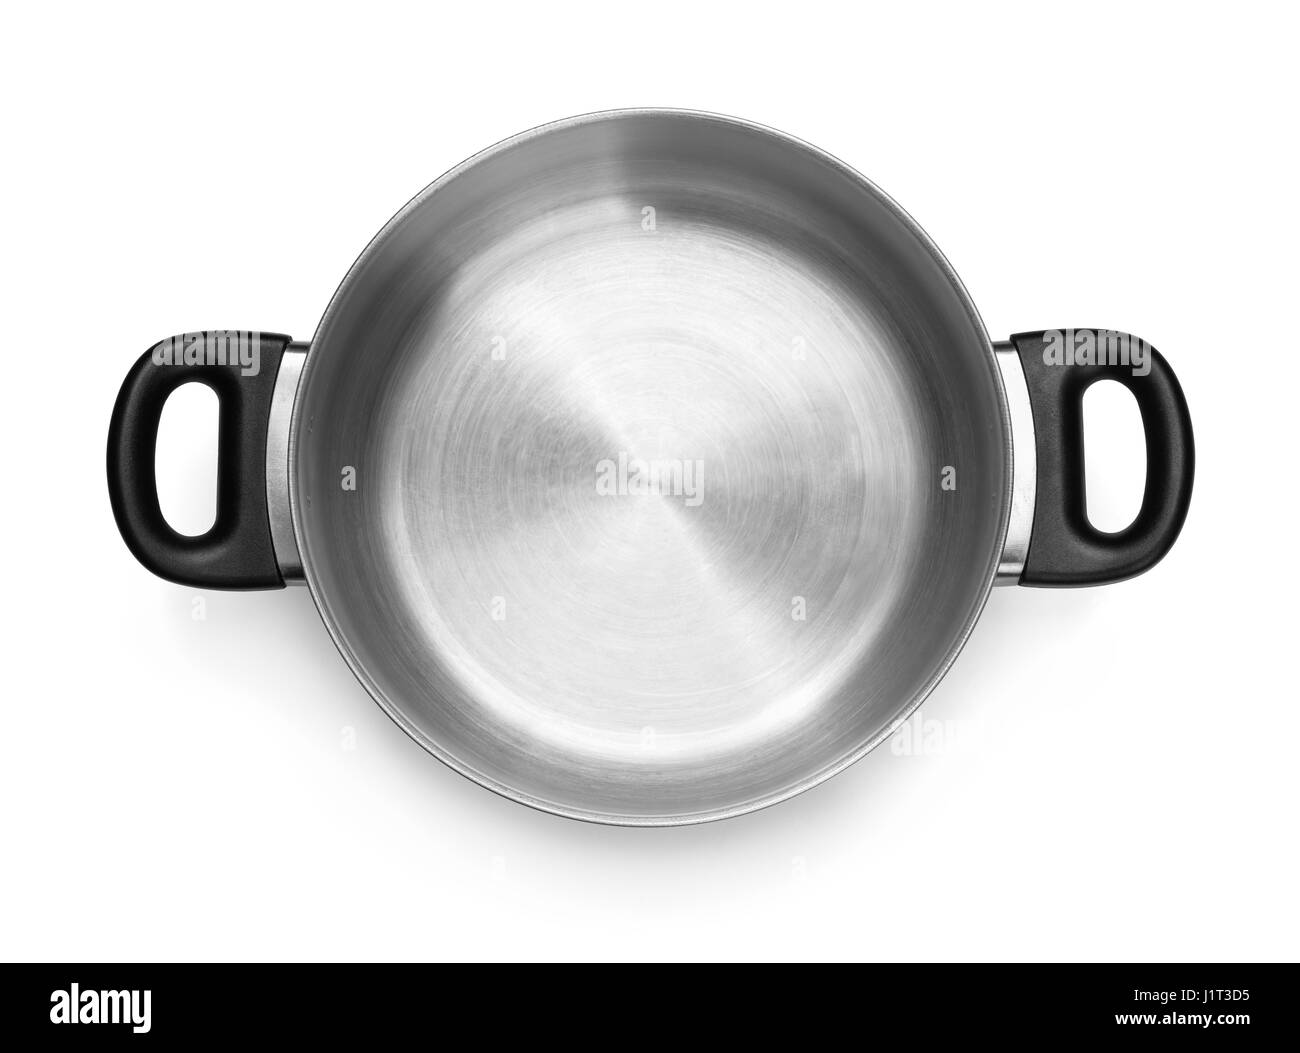 Top view of empty steel cooking pot isolated on white Stock Photo